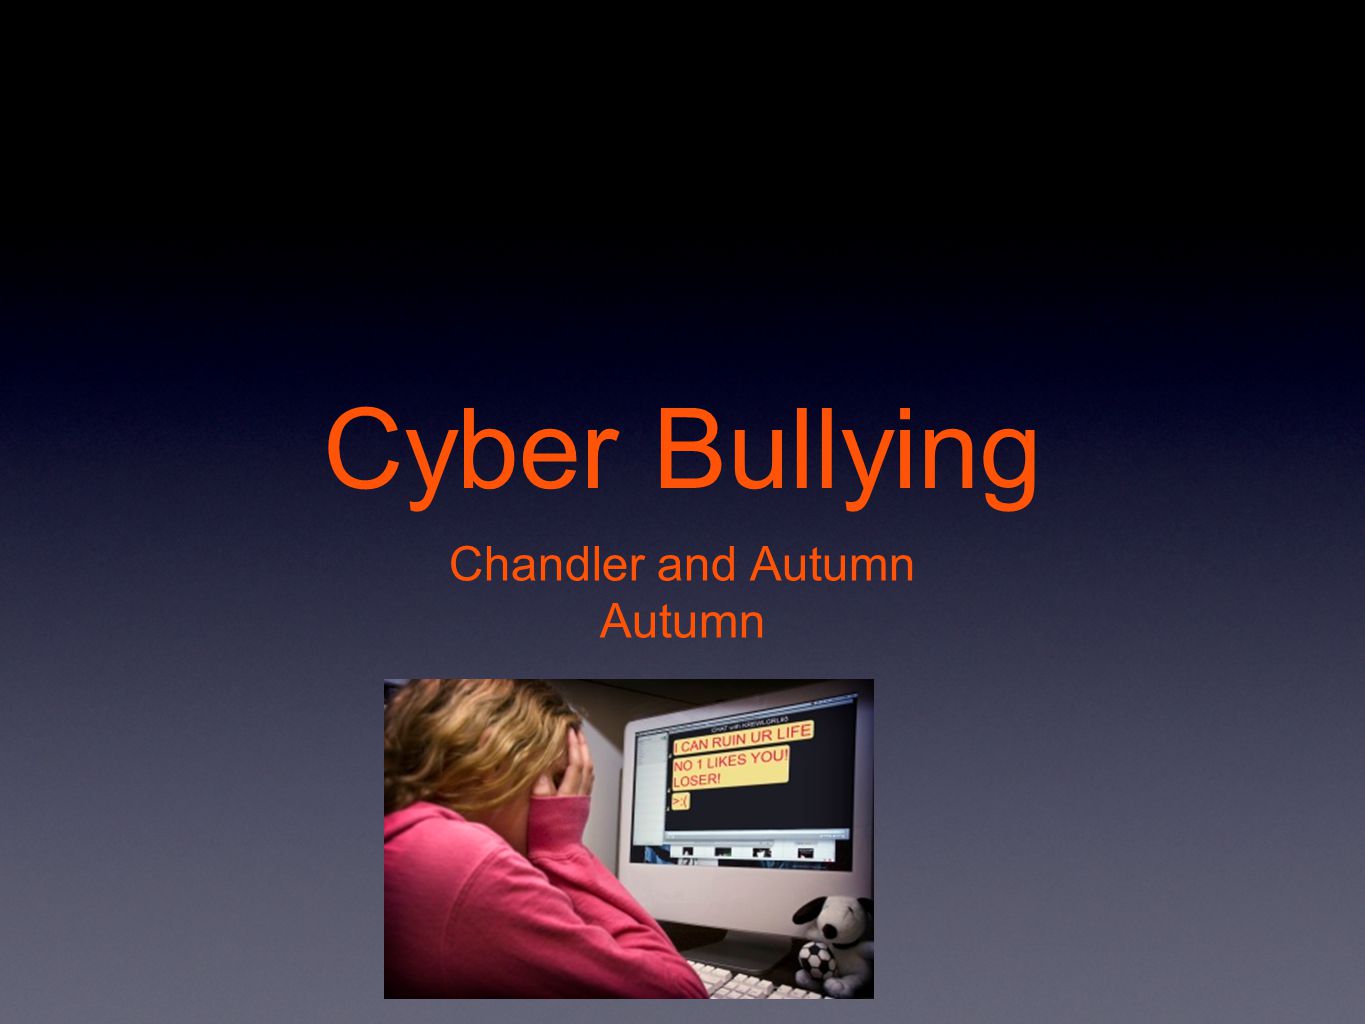 Cyber Bullying Chandler and Autumn Autumn